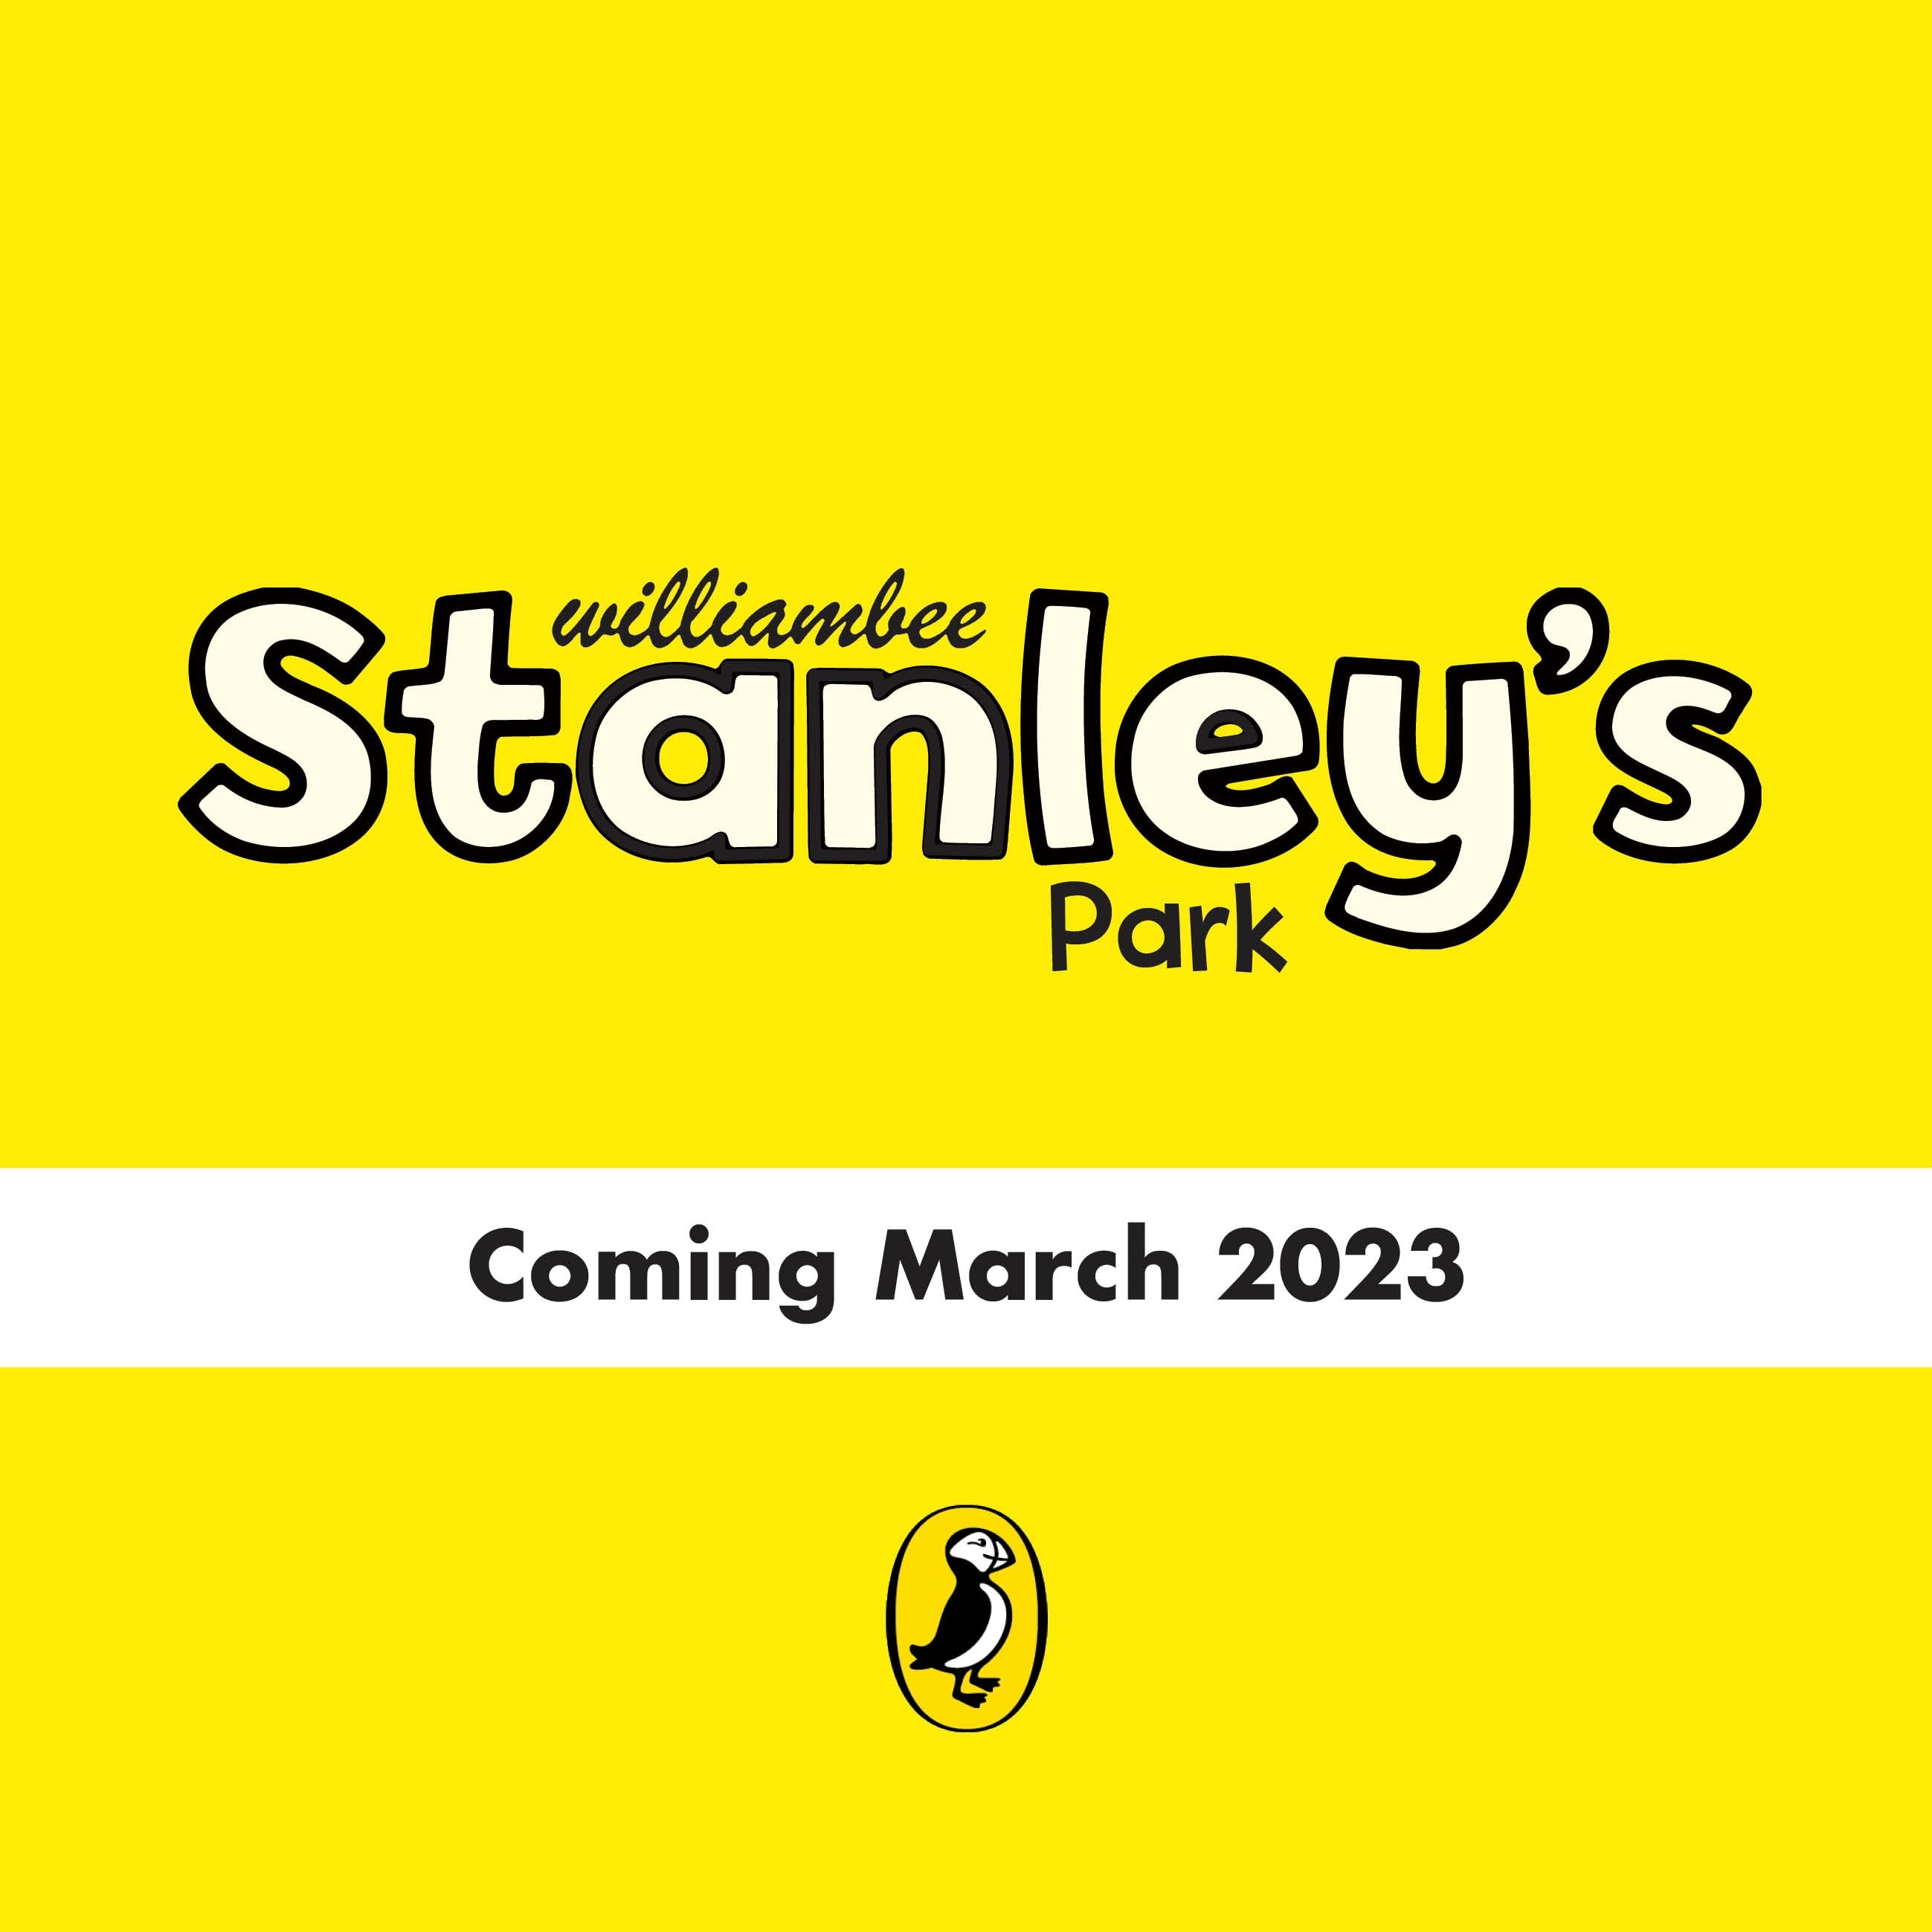 Book “Stanley's Park” by William Bee — March 2, 2023